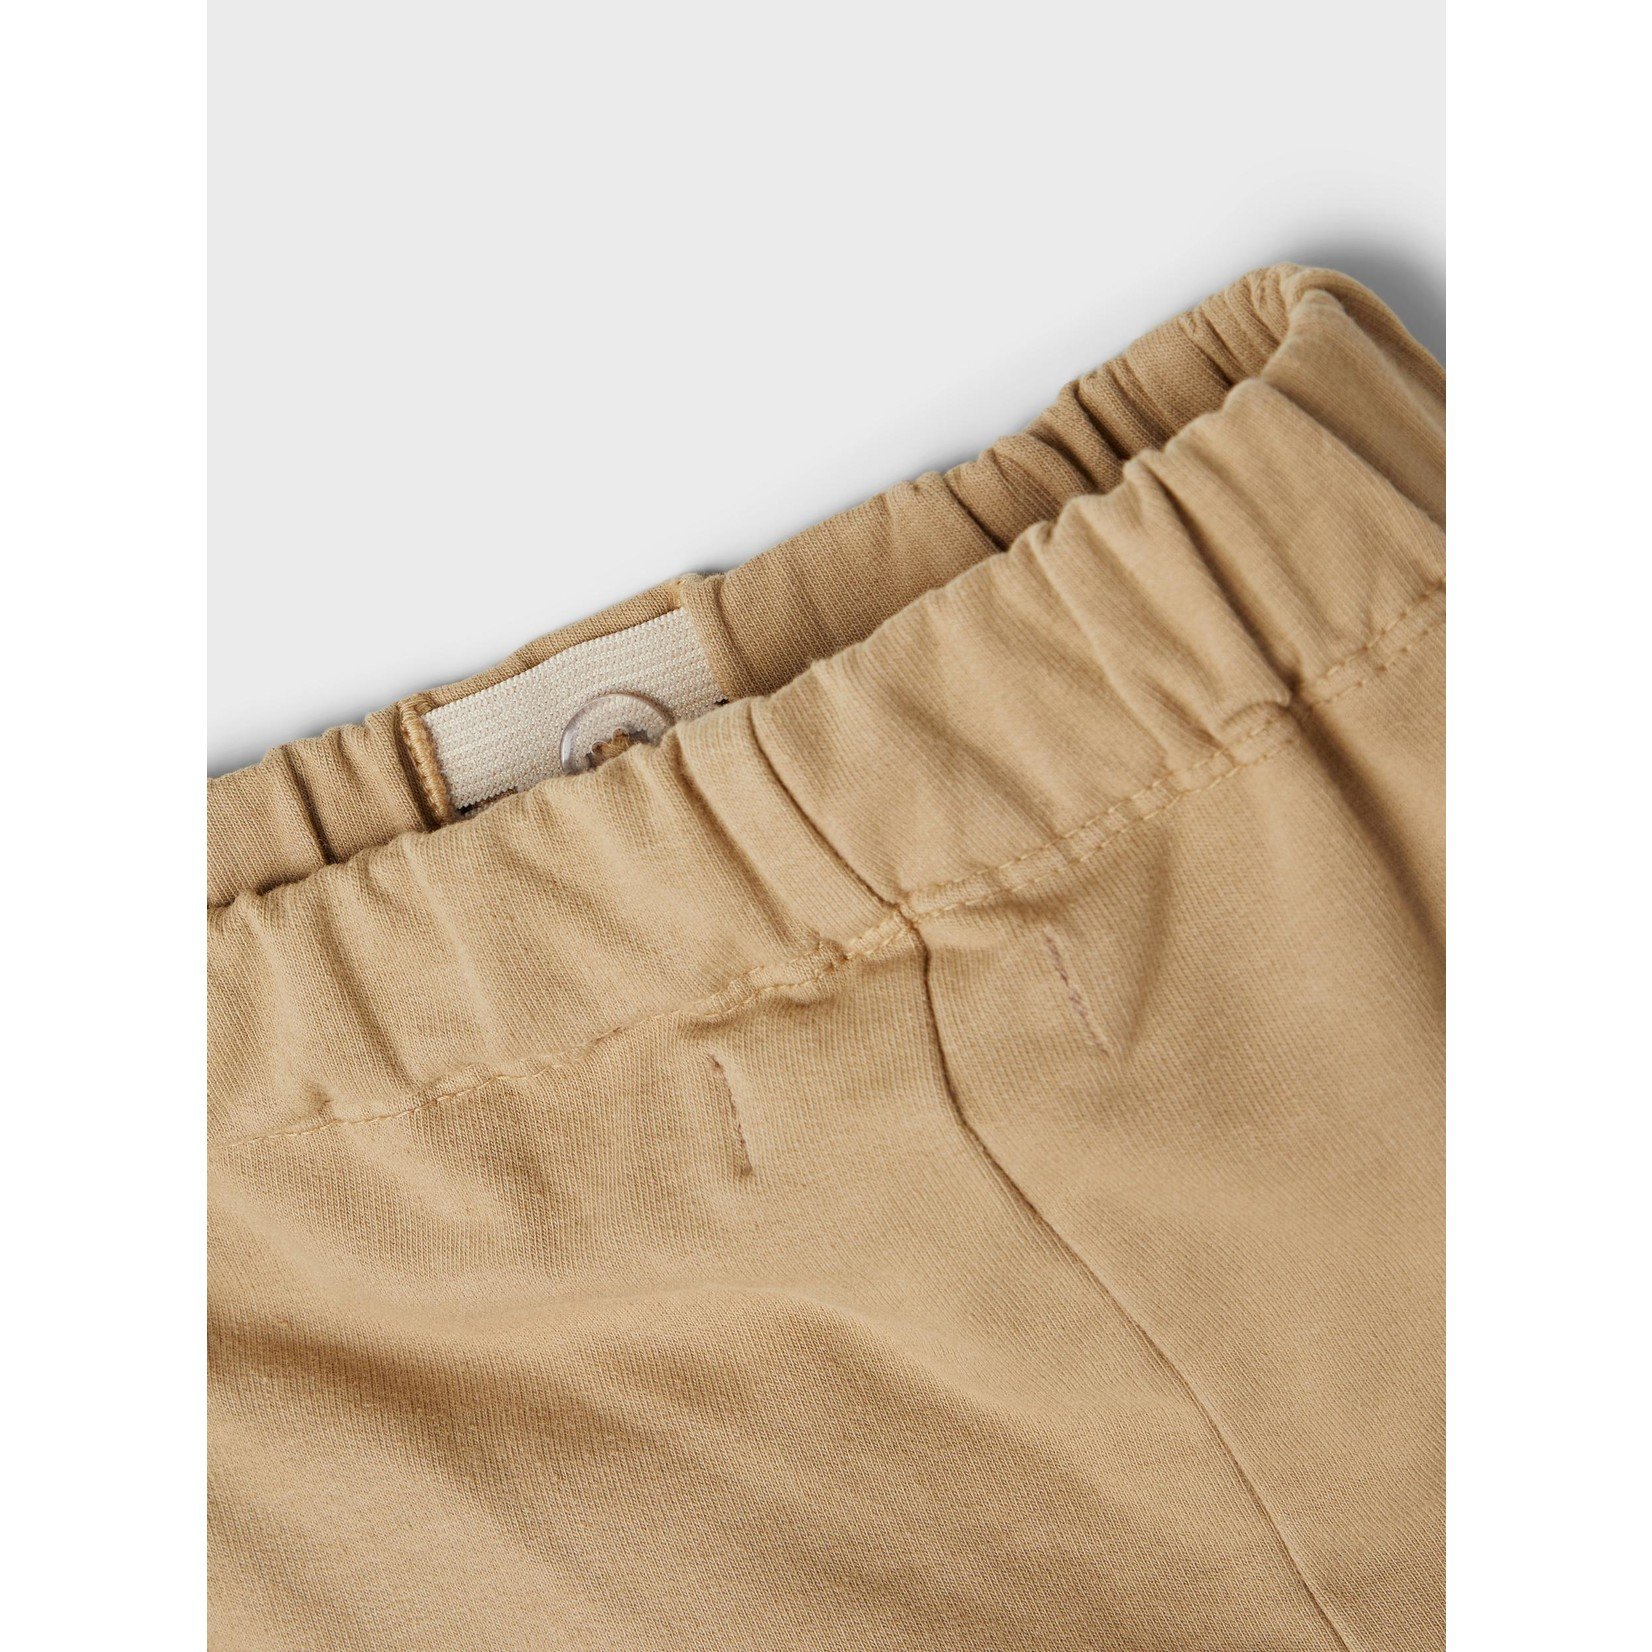 Lil Atelier Lil Atelier - NMNHIBO LOOSE ANCLE PANT LIL - Iced Coffee